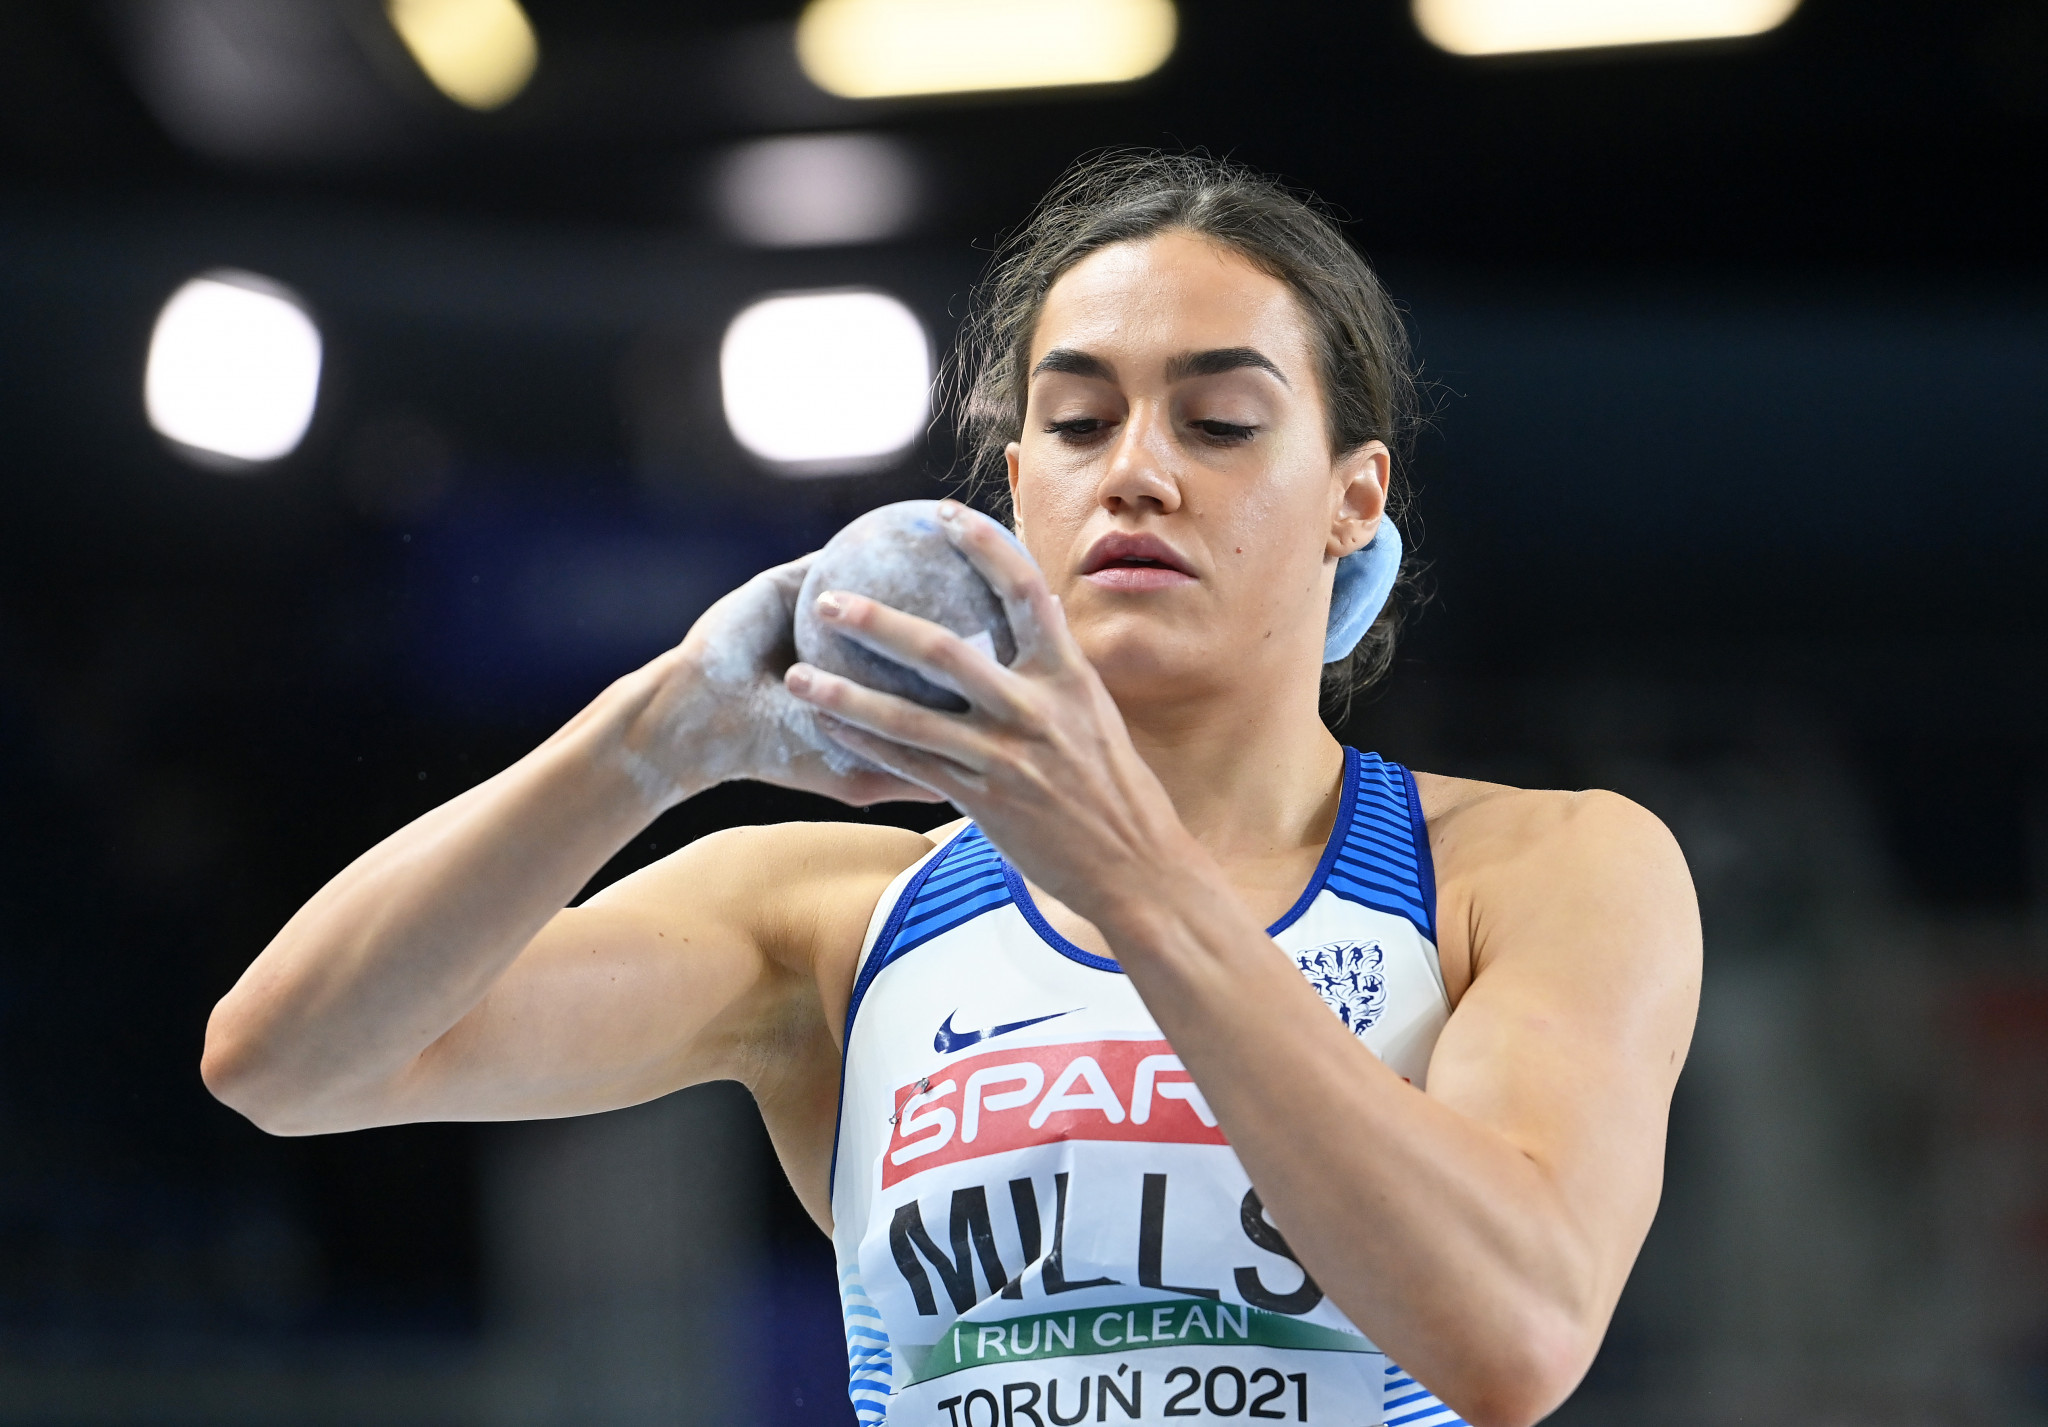 Holly Mills is set to compete in the women's heptathlon ©Getty Images